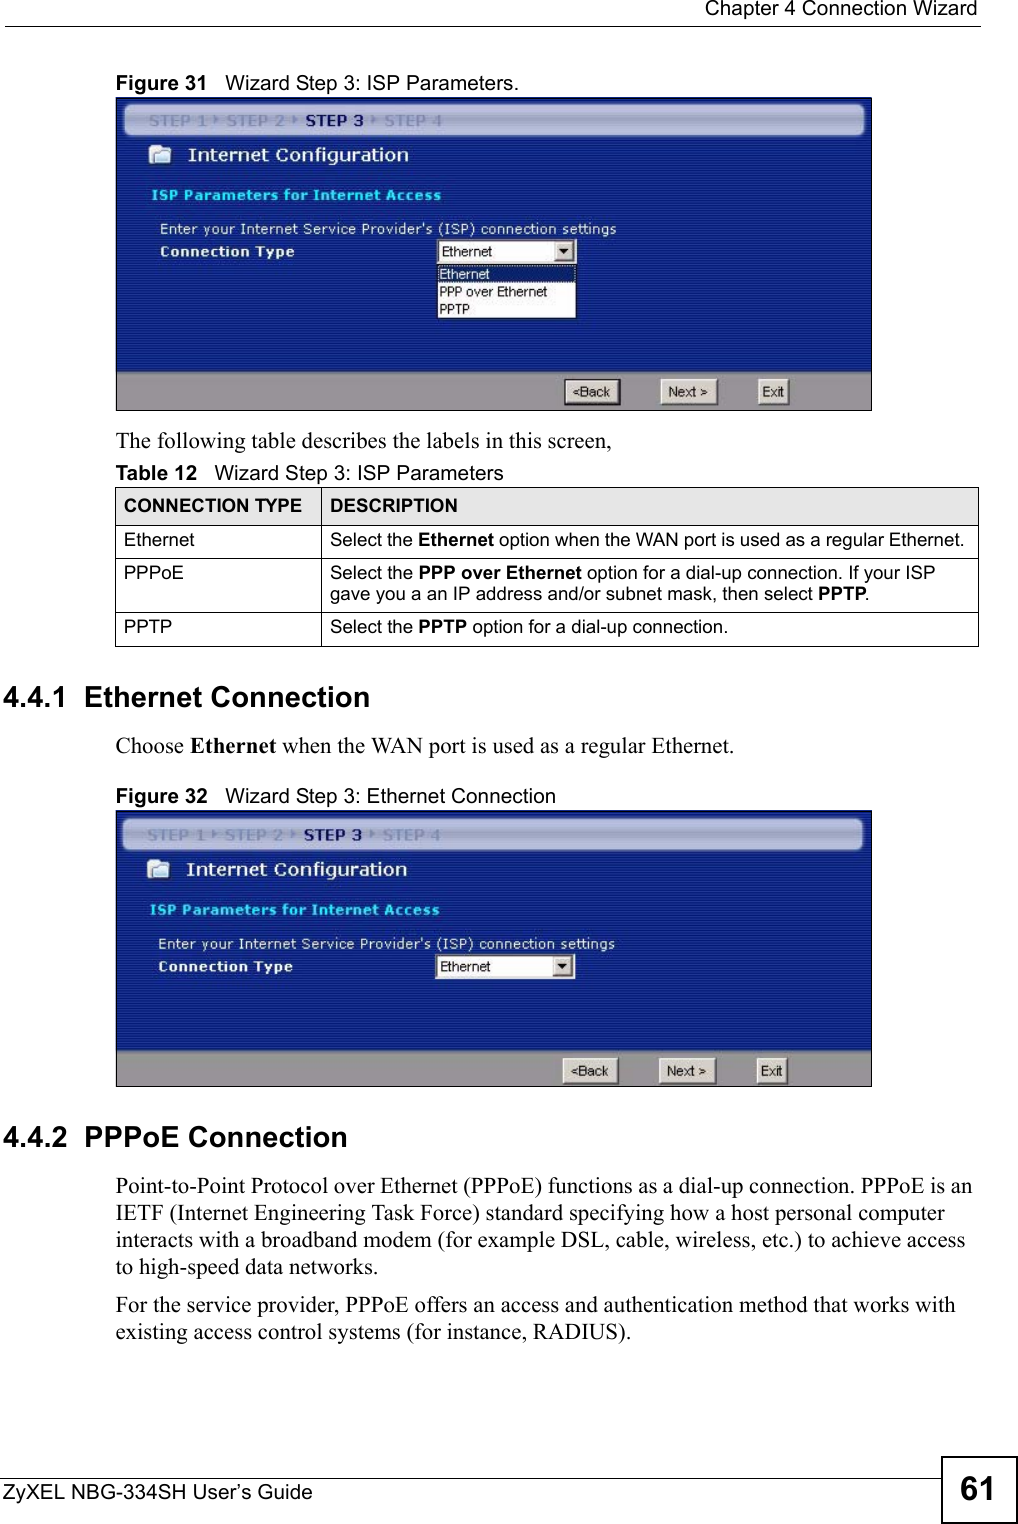  Chapter 4 Connection WizardZyXEL NBG-334SH User’s Guide 61Figure 31   Wizard Step 3: ISP Parameters.The following table describes the labels in this screen,4.4.1  Ethernet ConnectionChoose Ethernet when the WAN port is used as a regular Ethernet.Figure 32   Wizard Step 3: Ethernet Connection4.4.2  PPPoE ConnectionPoint-to-Point Protocol over Ethernet (PPPoE) functions as a dial-up connection. PPPoE is an IETF (Internet Engineering Task Force) standard specifying how a host personal computer interacts with a broadband modem (for example DSL, cable, wireless, etc.) to achieve access to high-speed data networks.For the service provider, PPPoE offers an access and authentication method that works with existing access control systems (for instance, RADIUS). Table 12   Wizard Step 3: ISP ParametersCONNECTION TYPE DESCRIPTIONEthernet Select the Ethernet option when the WAN port is used as a regular Ethernet. PPPoE Select the PPP over Ethernet option for a dial-up connection. If your ISP gave you a an IP address and/or subnet mask, then select PPTP.PPTP Select the PPTP option for a dial-up connection.